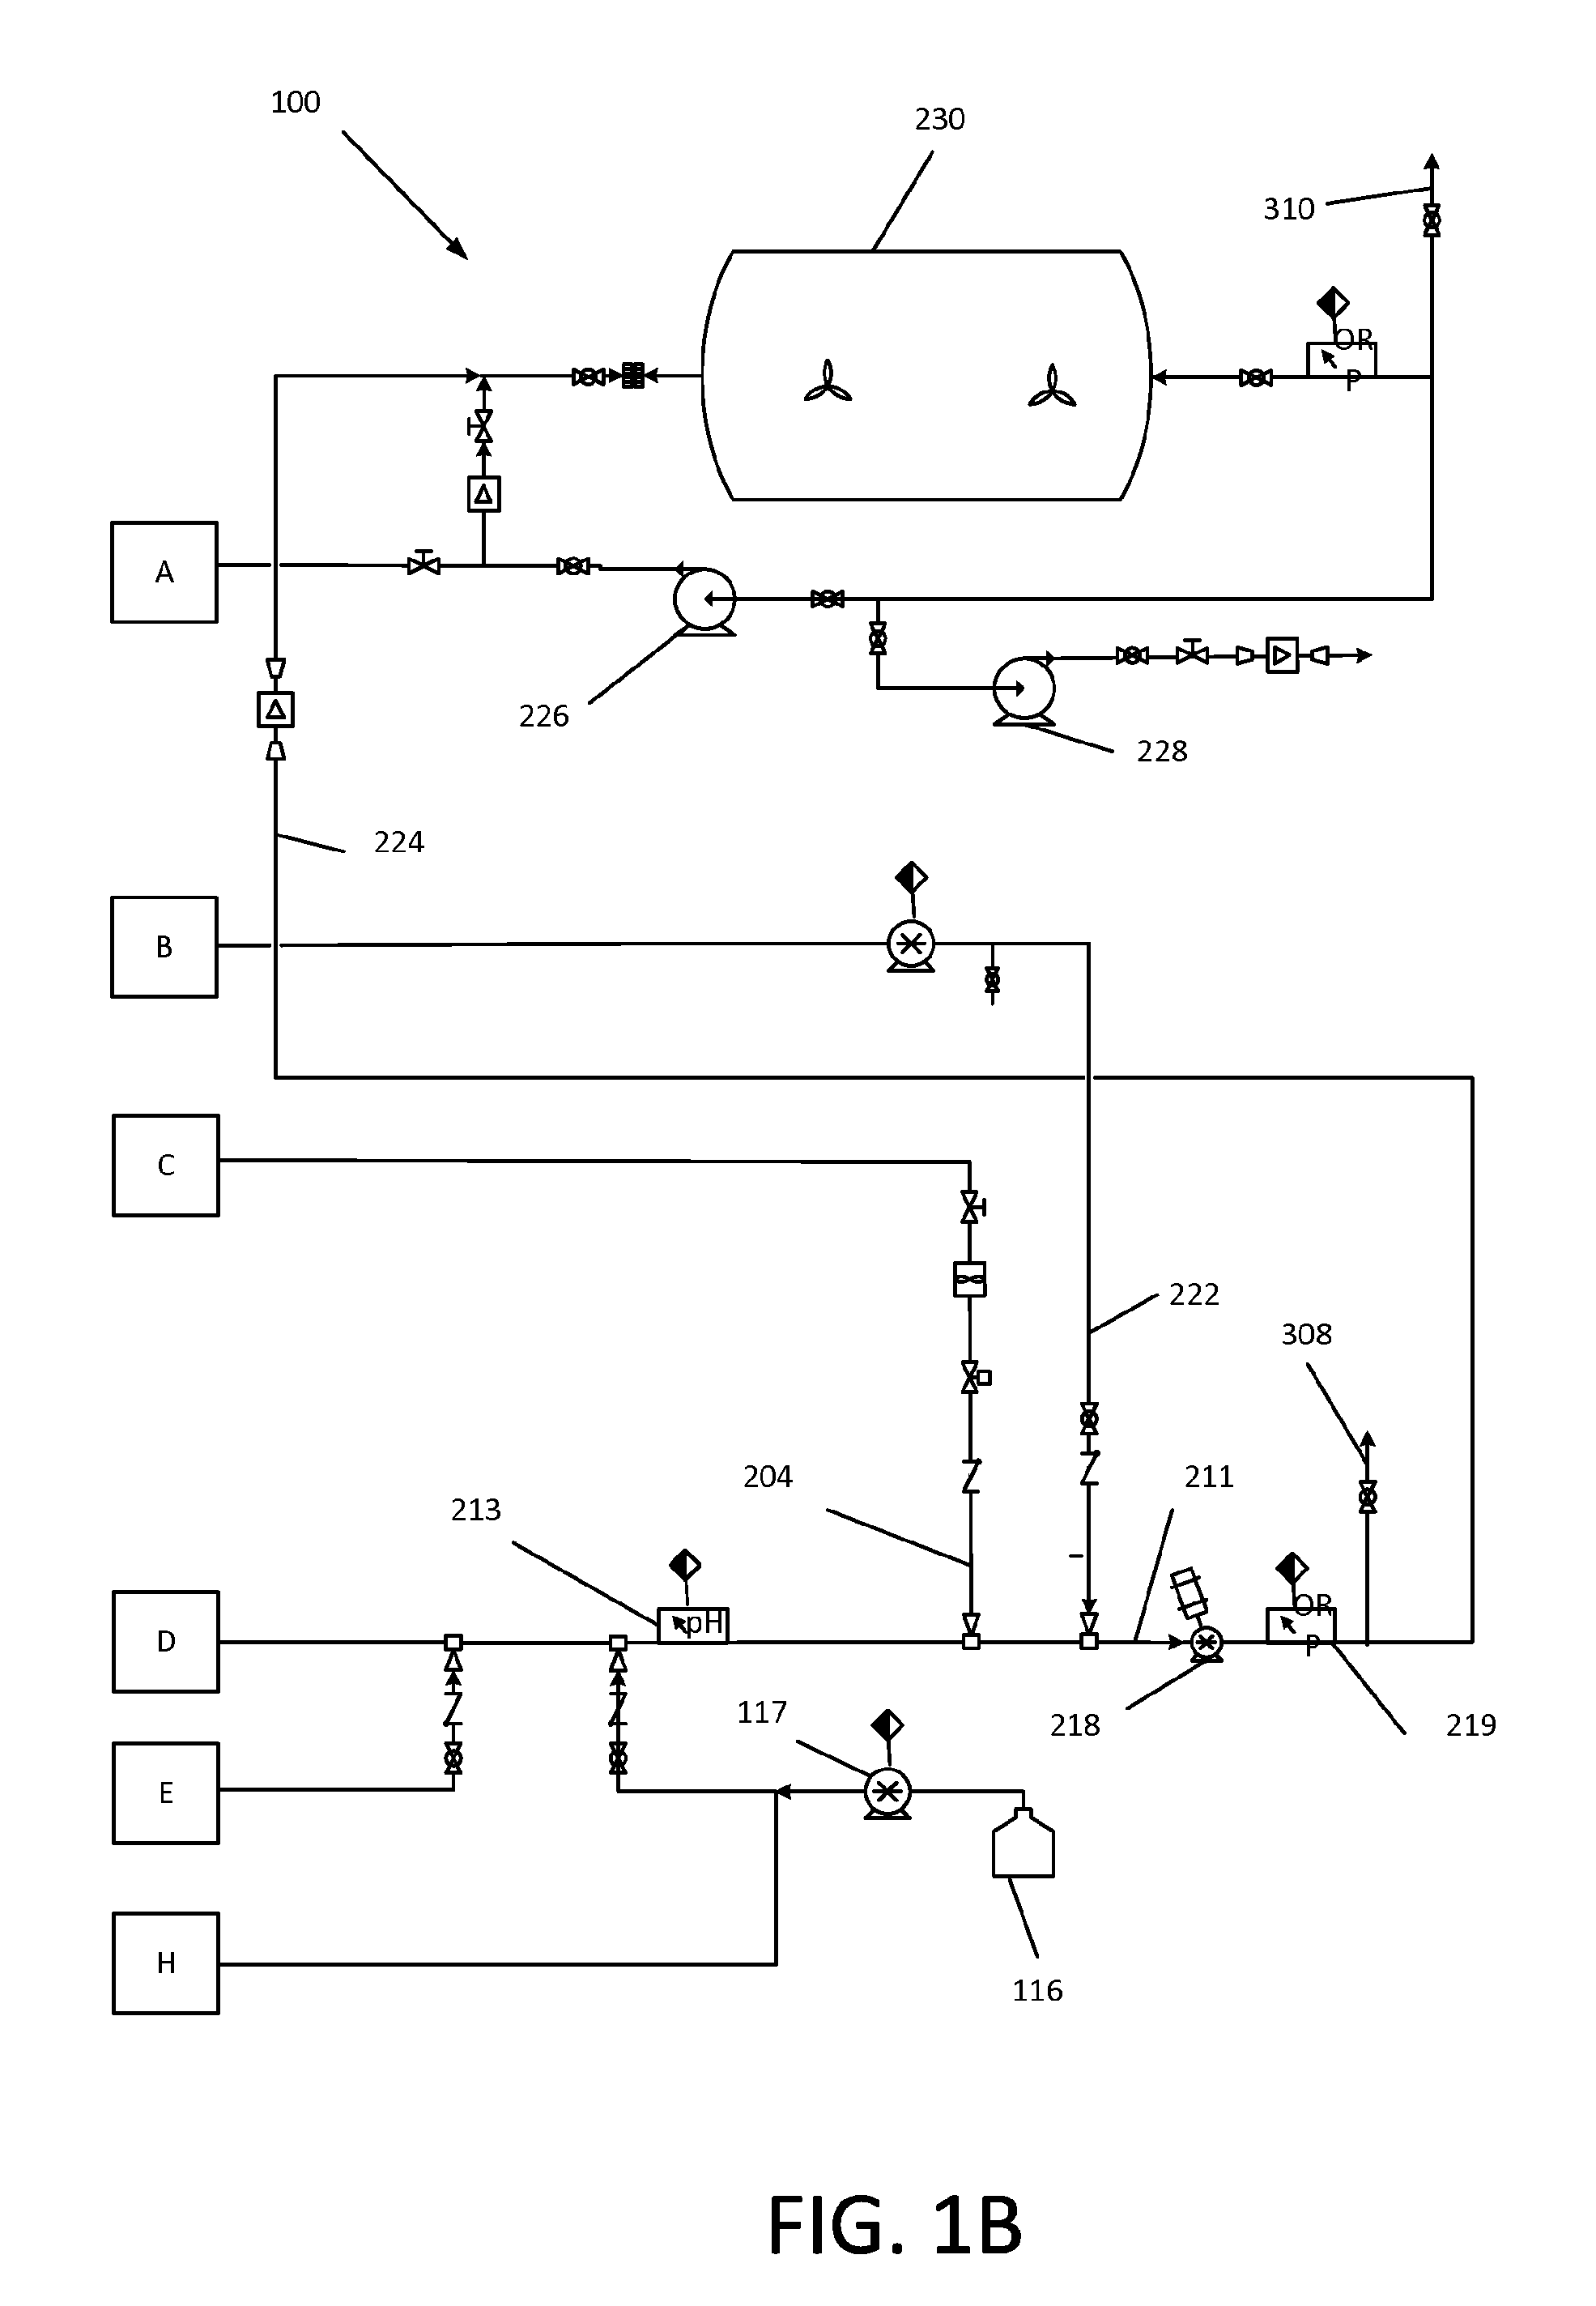 Apparatus and method for oxidative treatment of organic contaminants in waste water